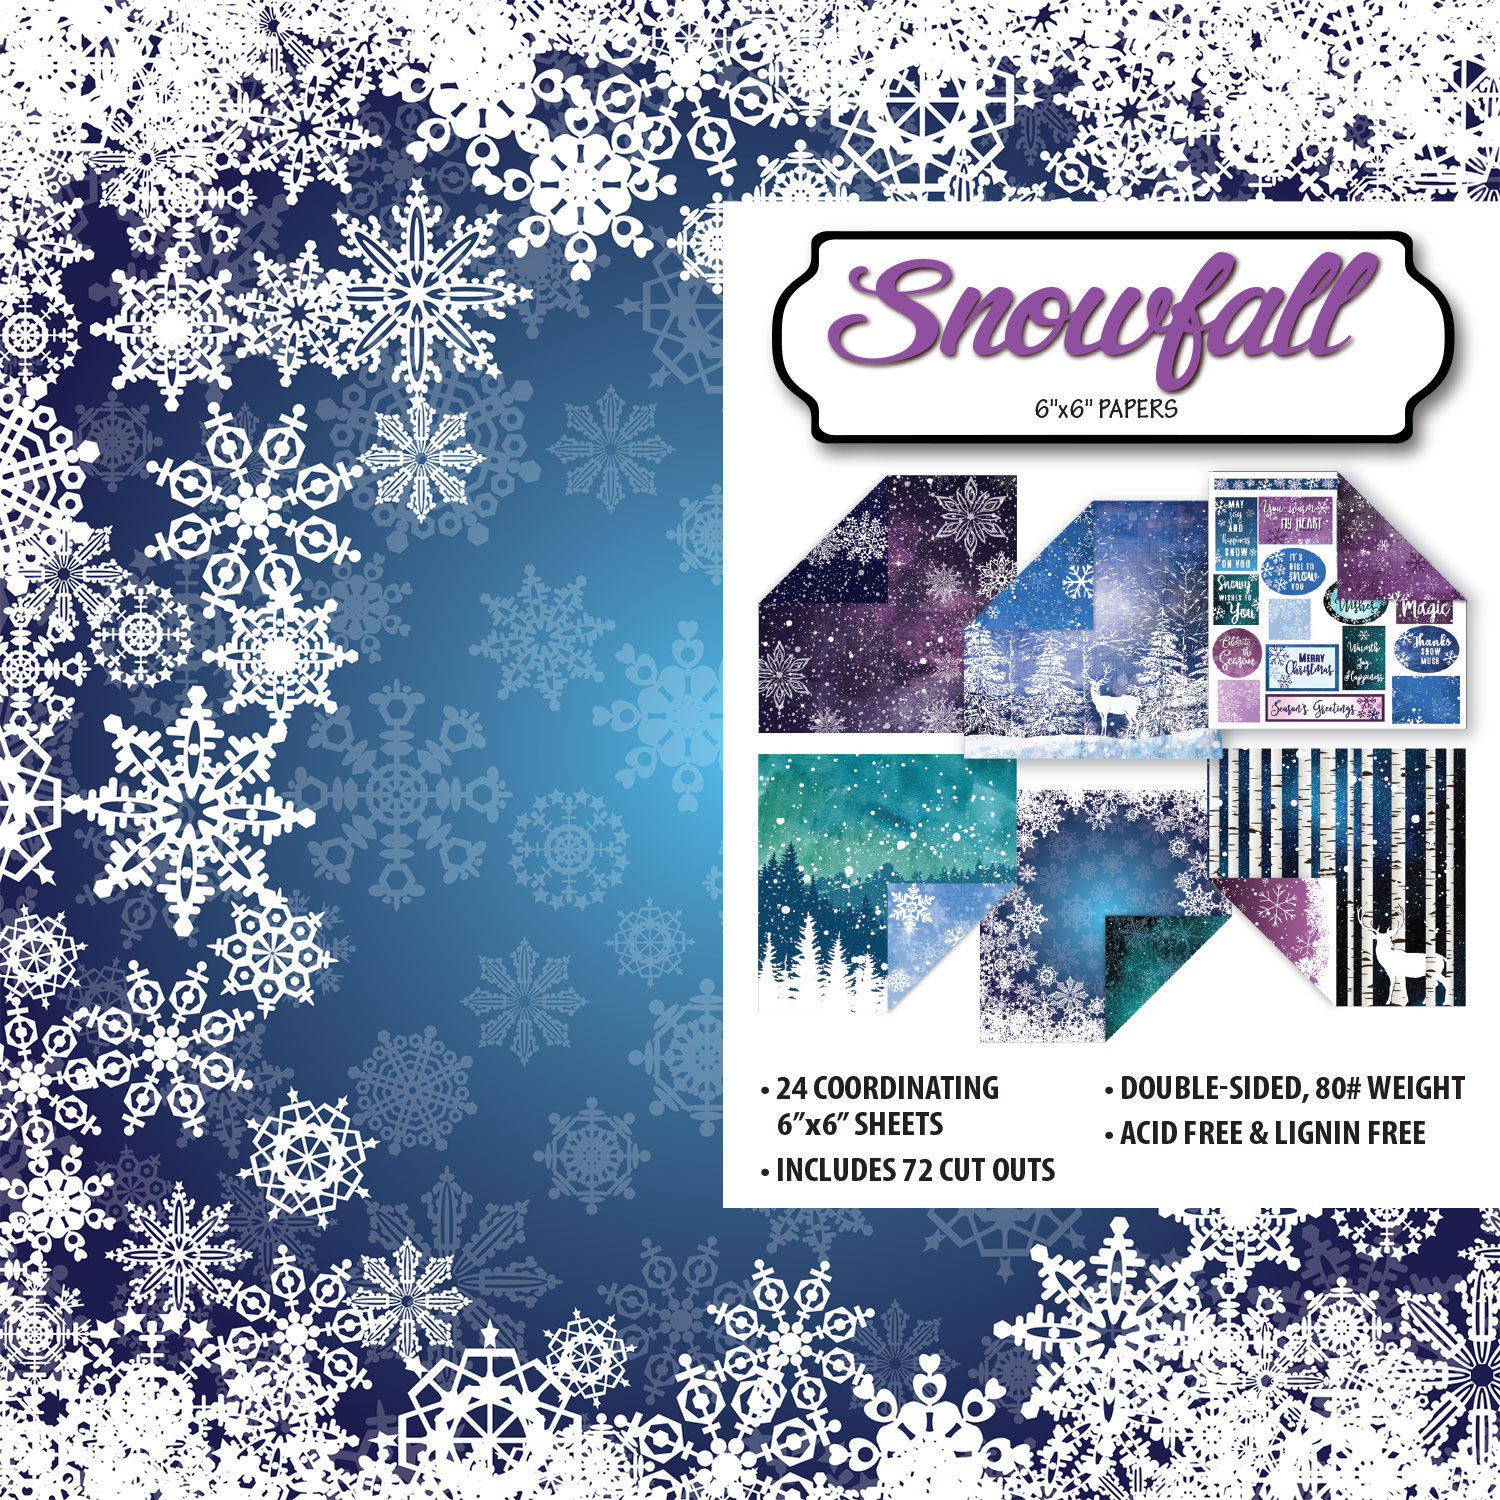 Snowfall 6"x6" Papers